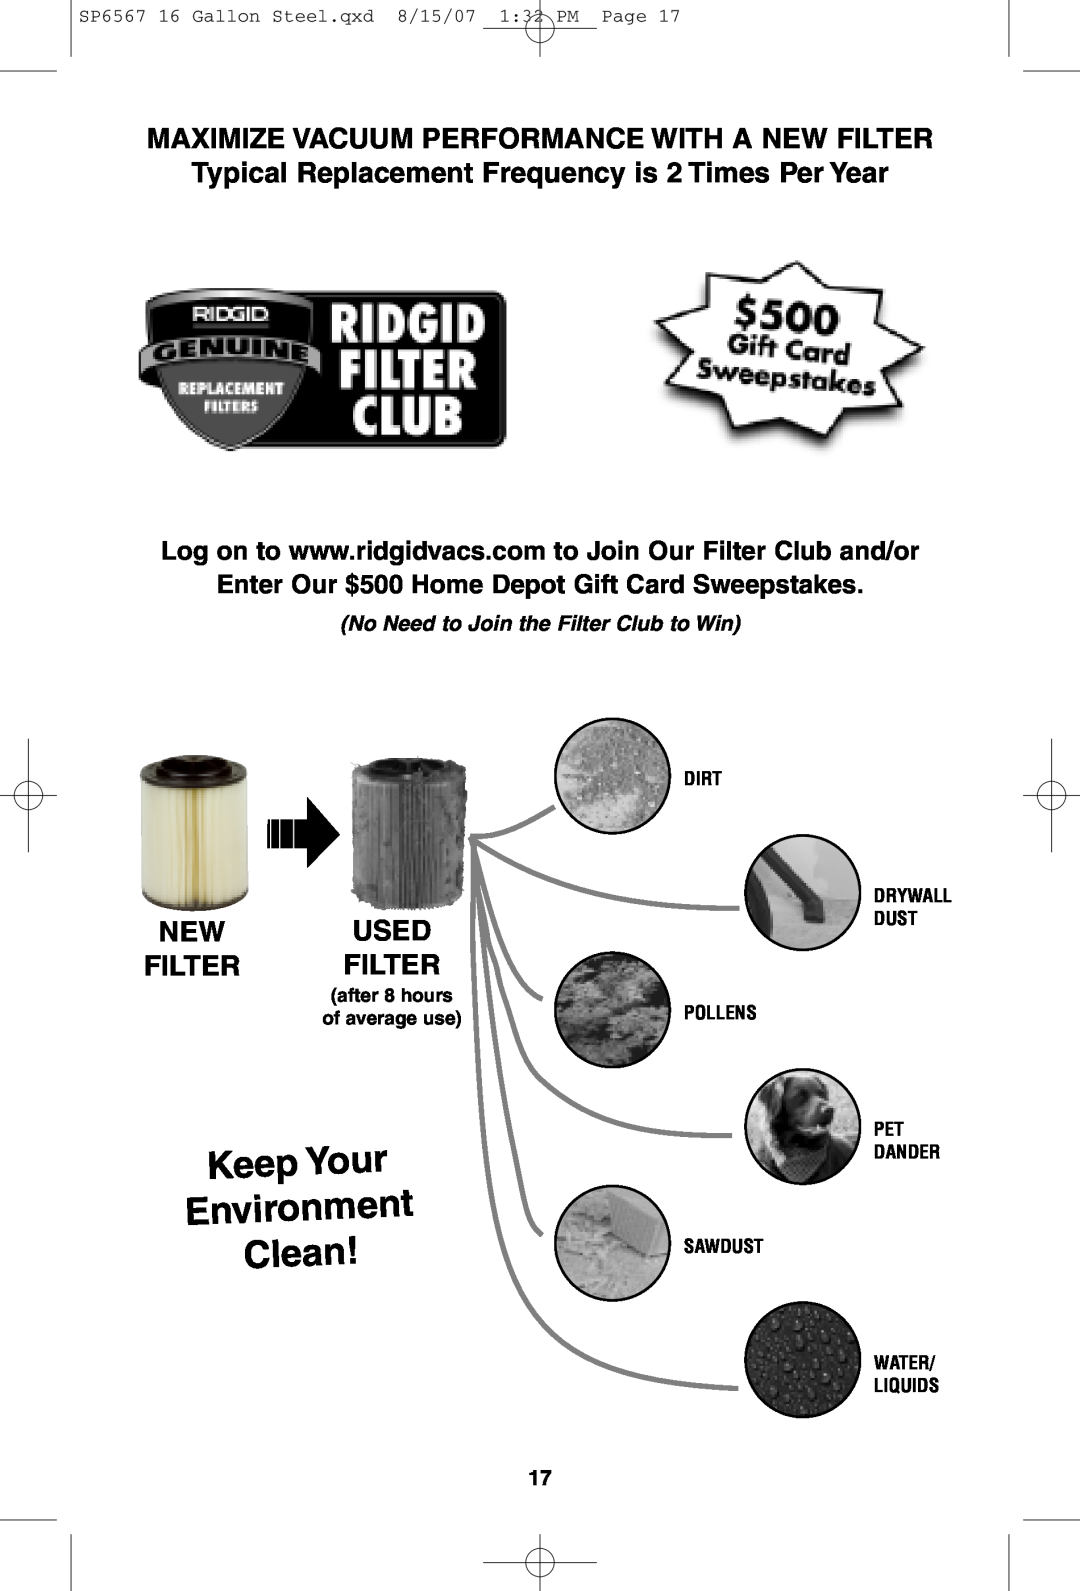 RIDGID WD1950 manual Keep Your, ronm, Envi, Clea, New Used Filter Filter, Enter Our $500 Home Depot Gift Card Sweepstakes 